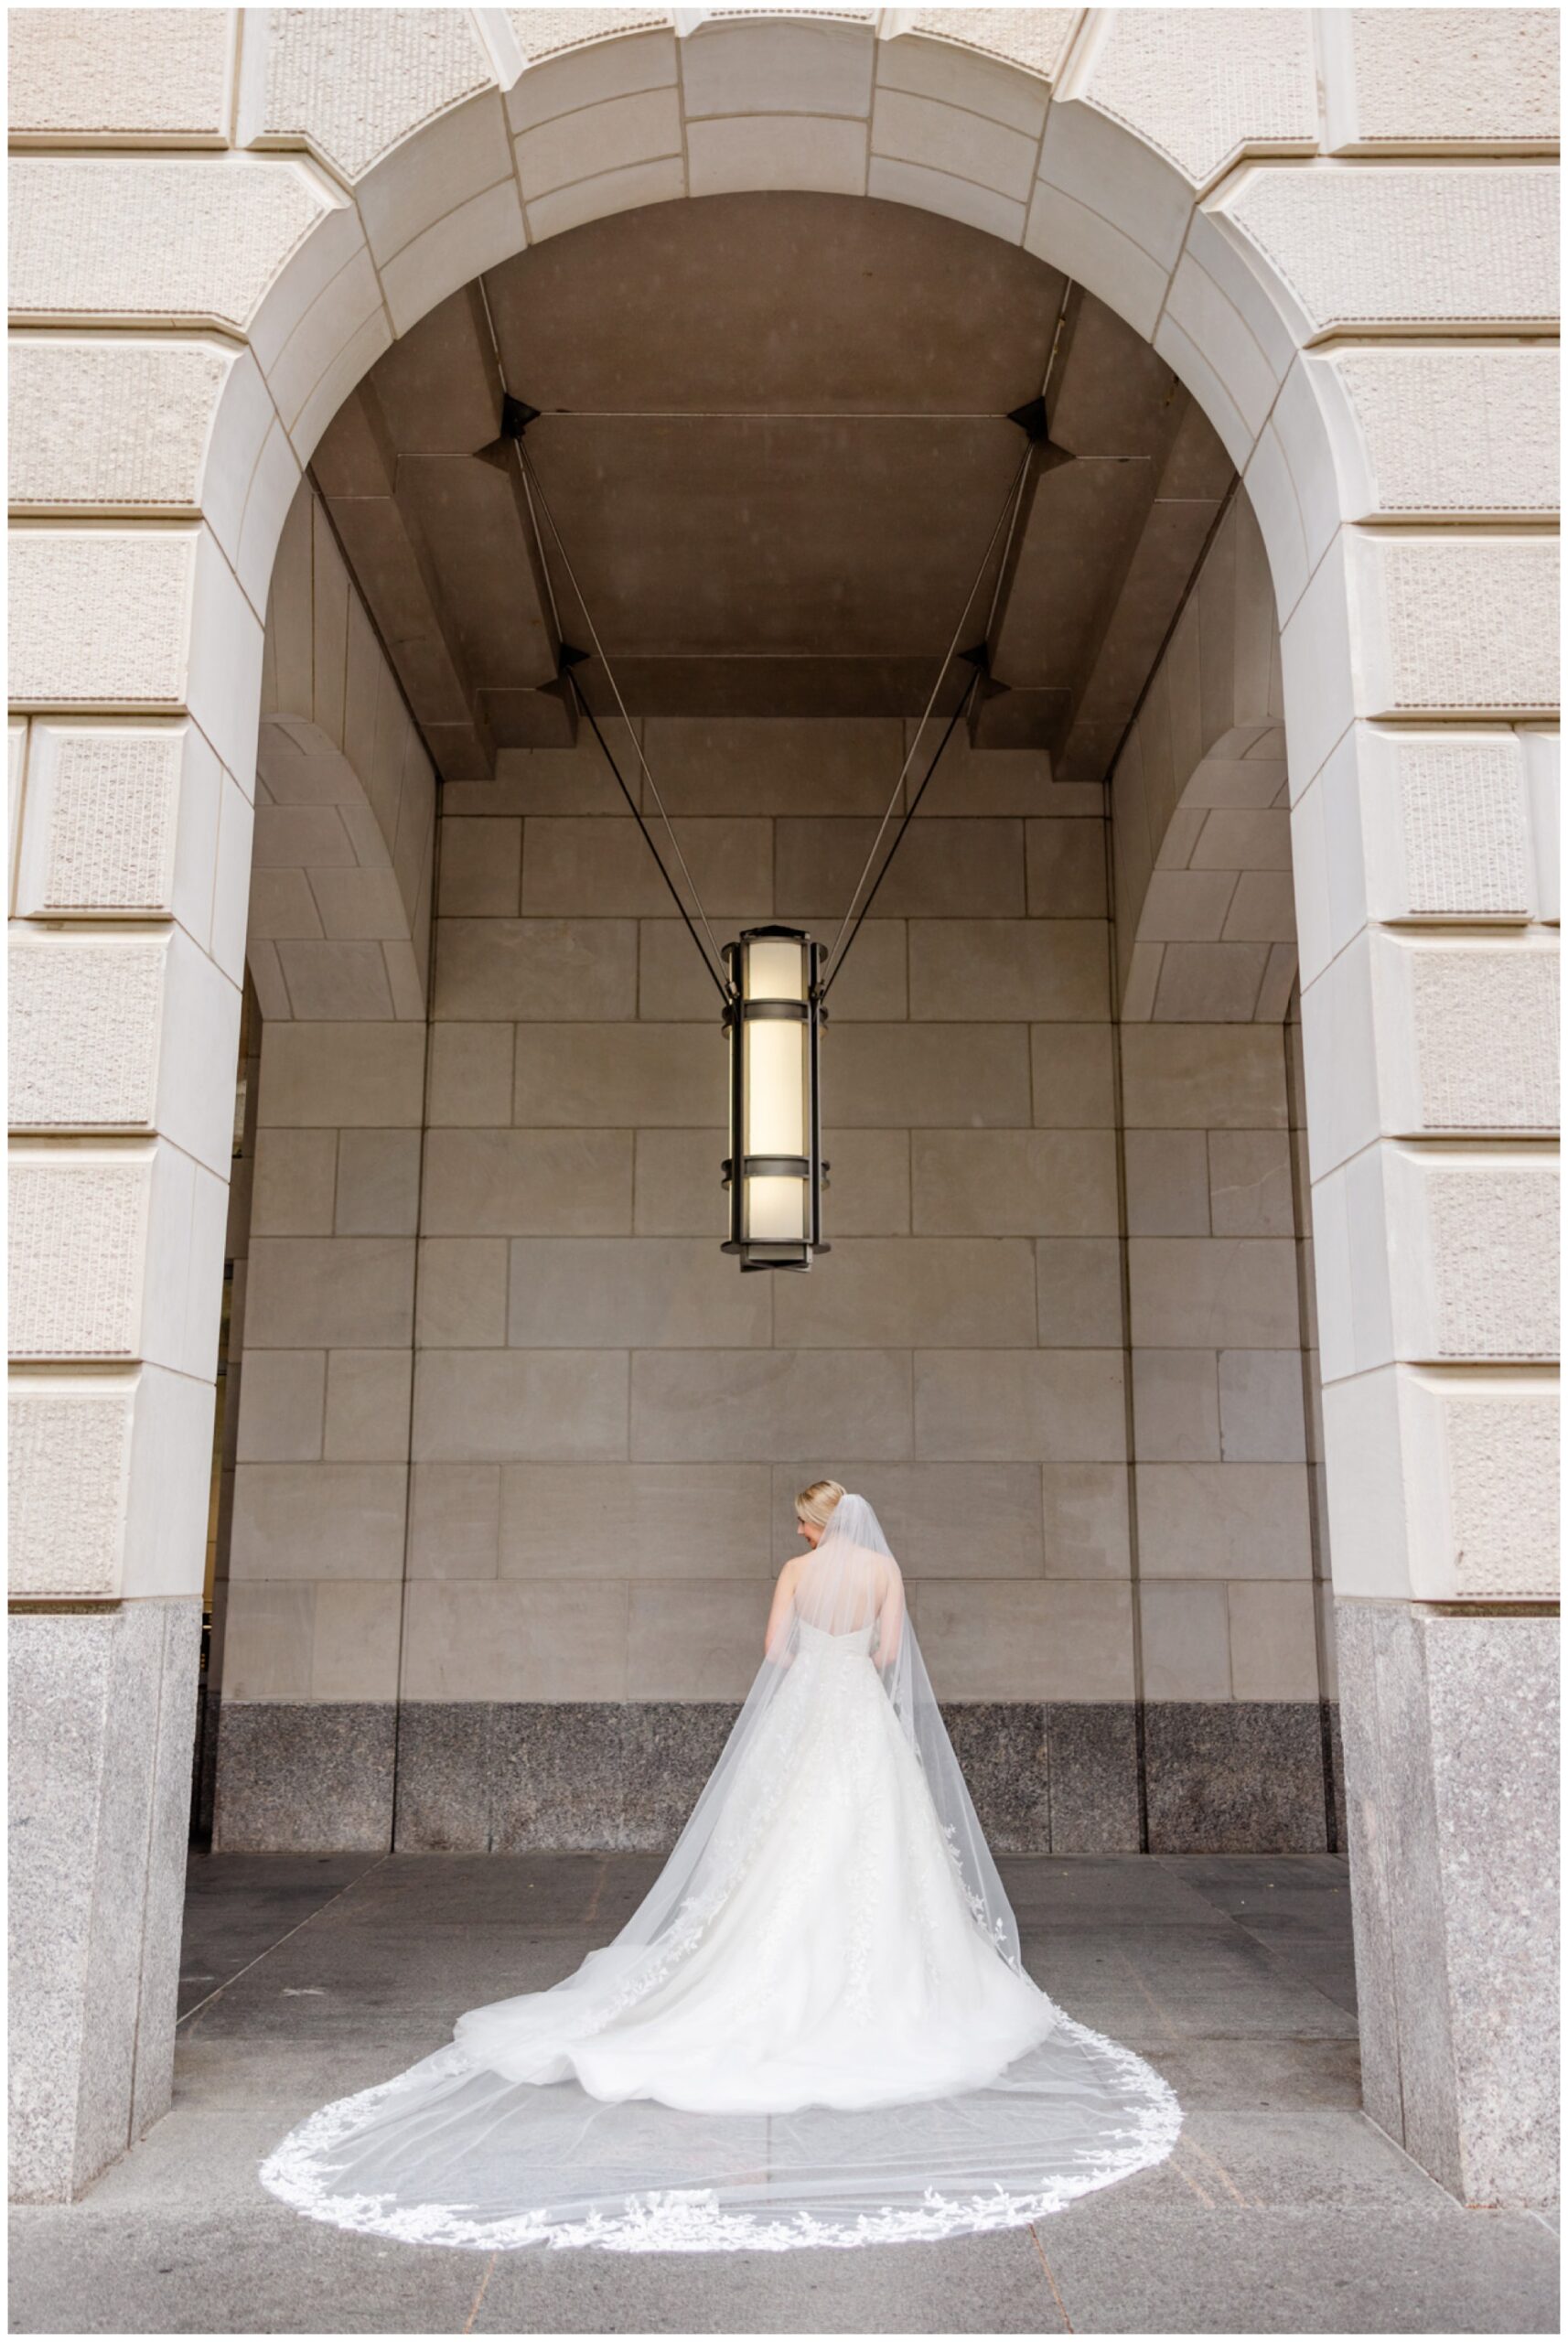 Ronald Reagan Building D.C. wedding, RR Building International Trade Center, classic D.C. wedding, classic wedding, black and white wedding, white aesthetic, spring wedding, spring wedding aesthetic, Rachel E.H. Photography, D.C. wedding photography, D.C. wedding photographer, Estee Couture wedding dress, cathedral length embroidered veil, JSL Visions